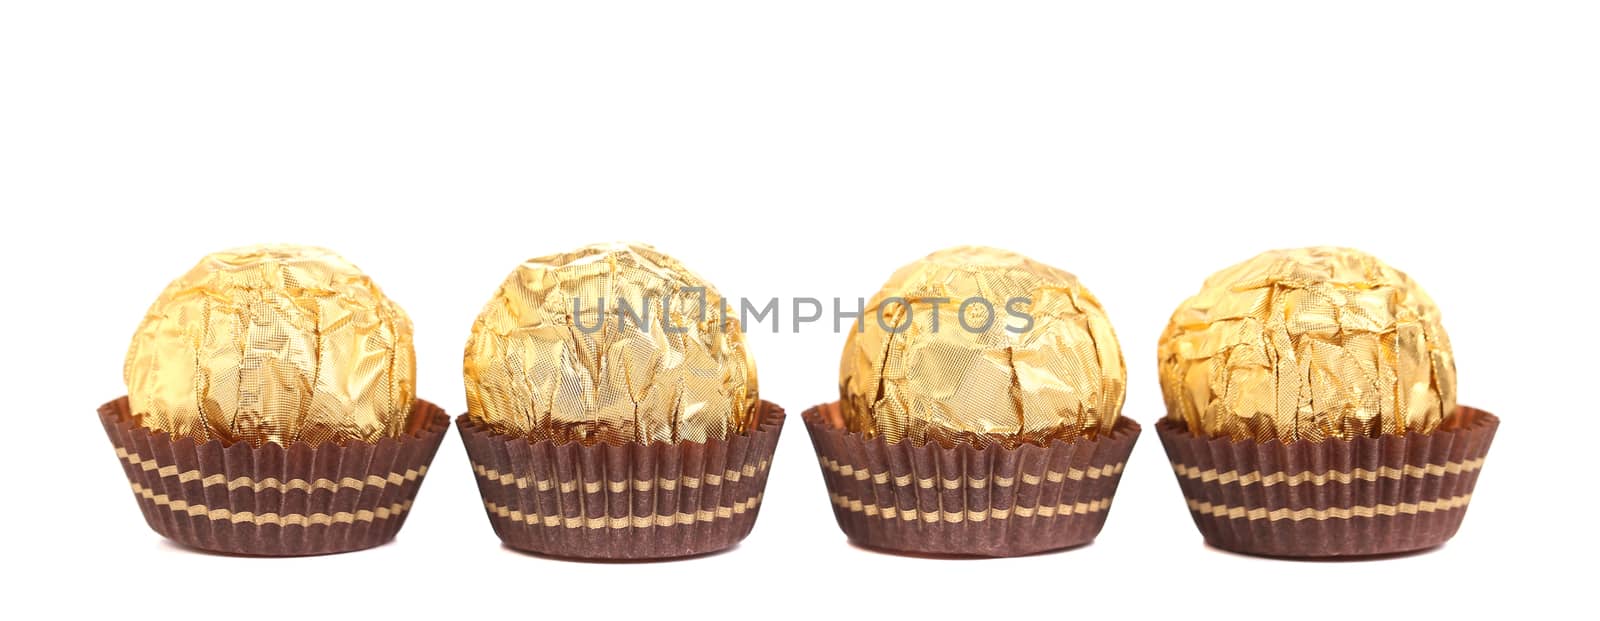 Four in row chocolate bonbons. Isolated on a white background.